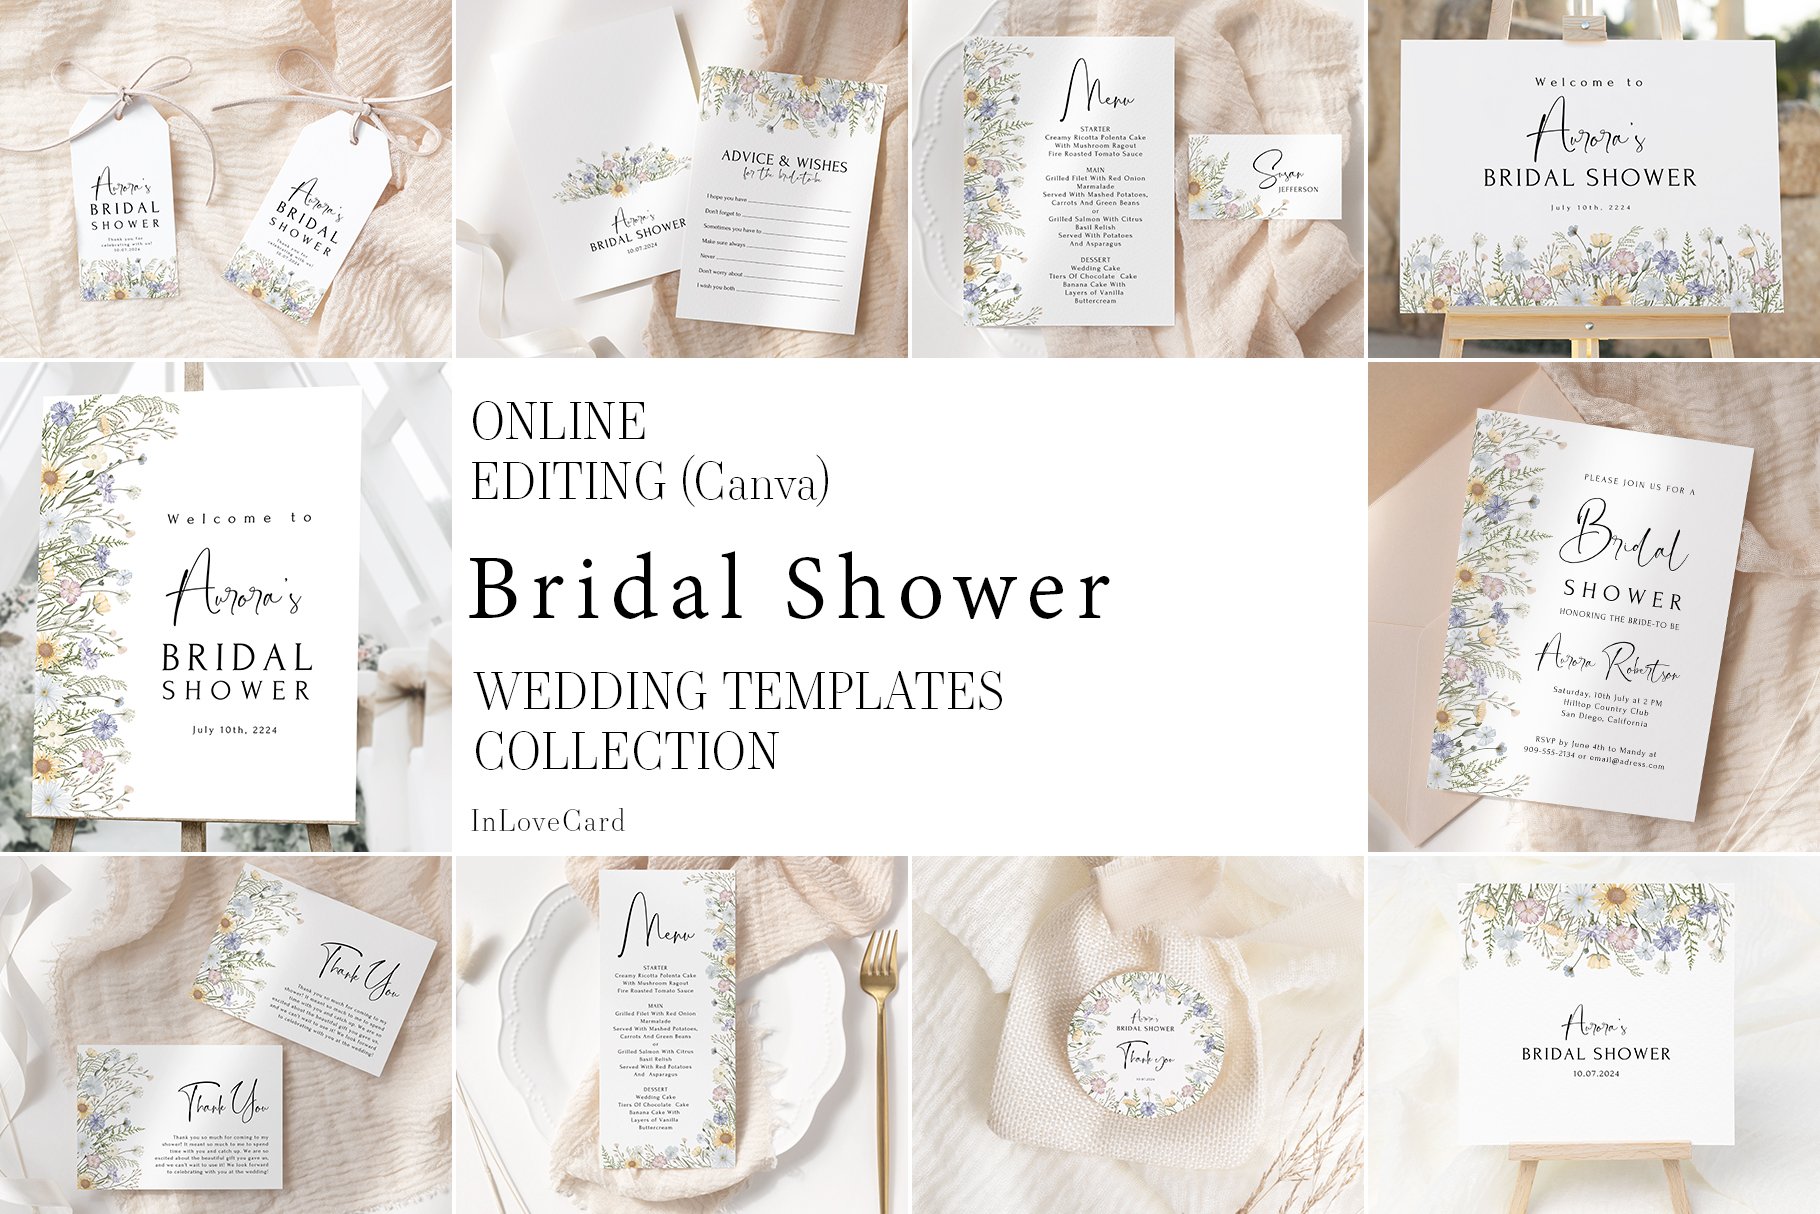 Wildflower Bridal Shower Templates cover image.